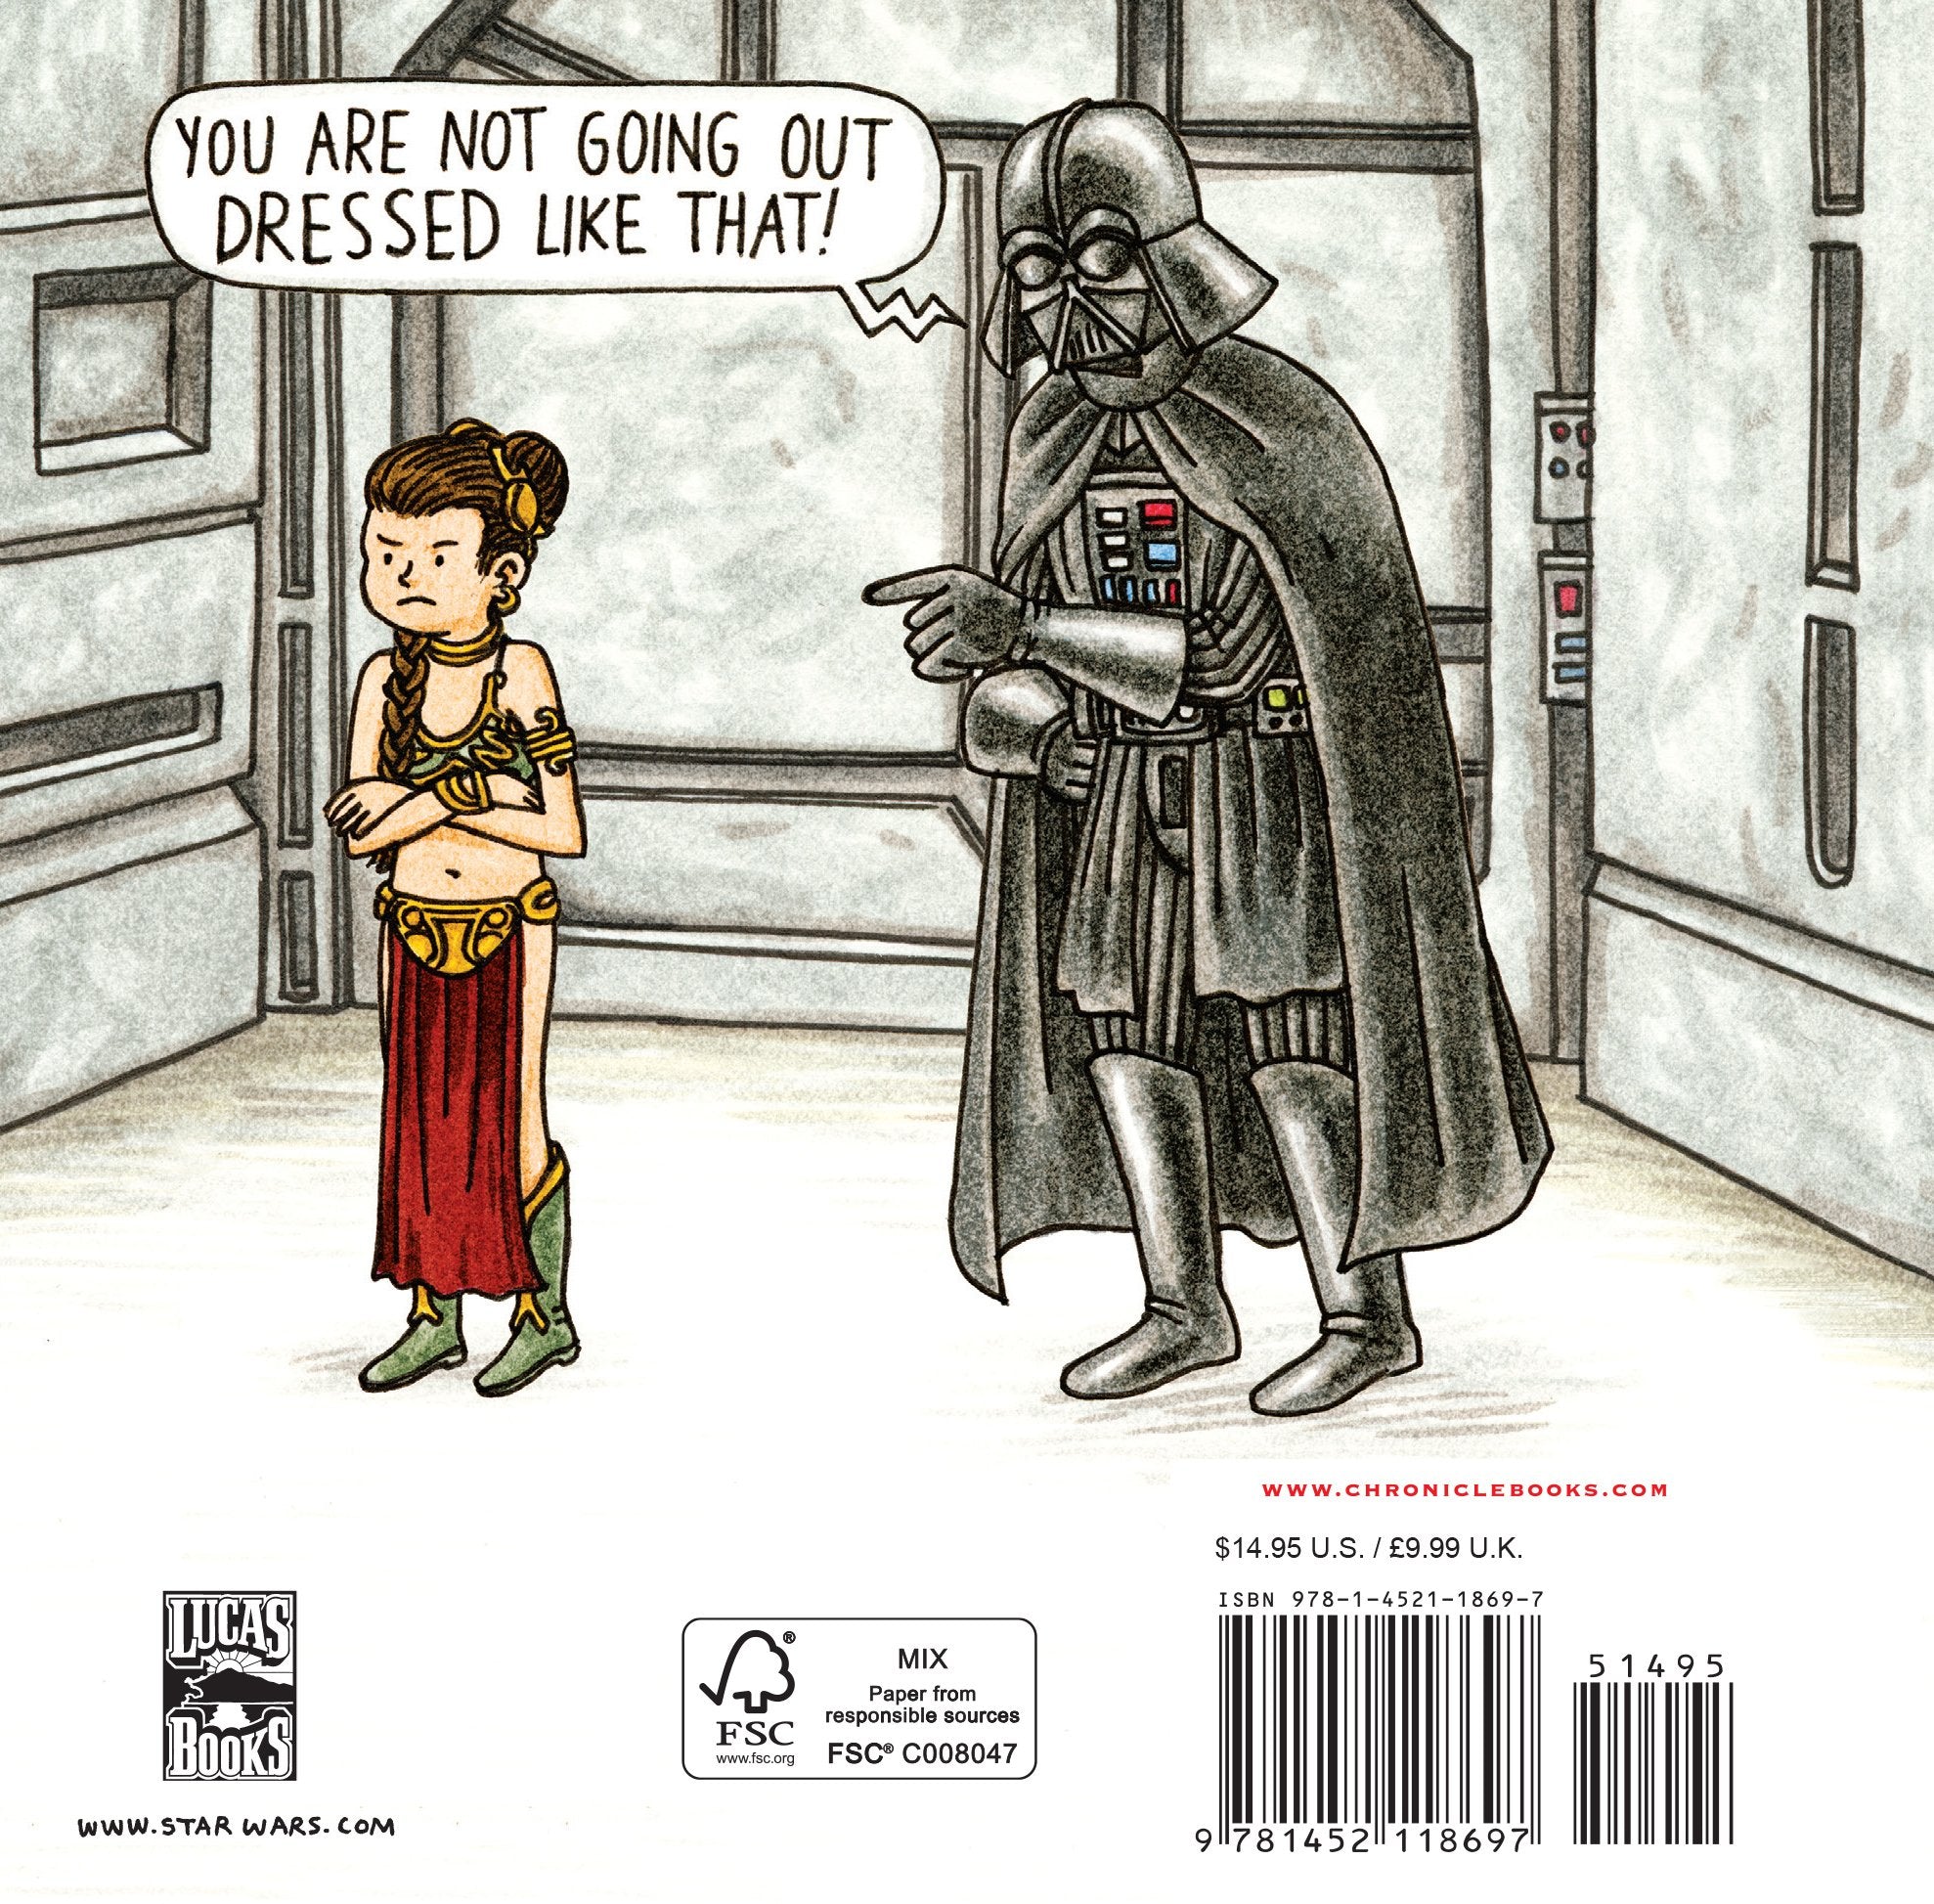 Vader's Little Princess - A Children's Book by Jeffrey Brown (Hardcover, Illustrated)